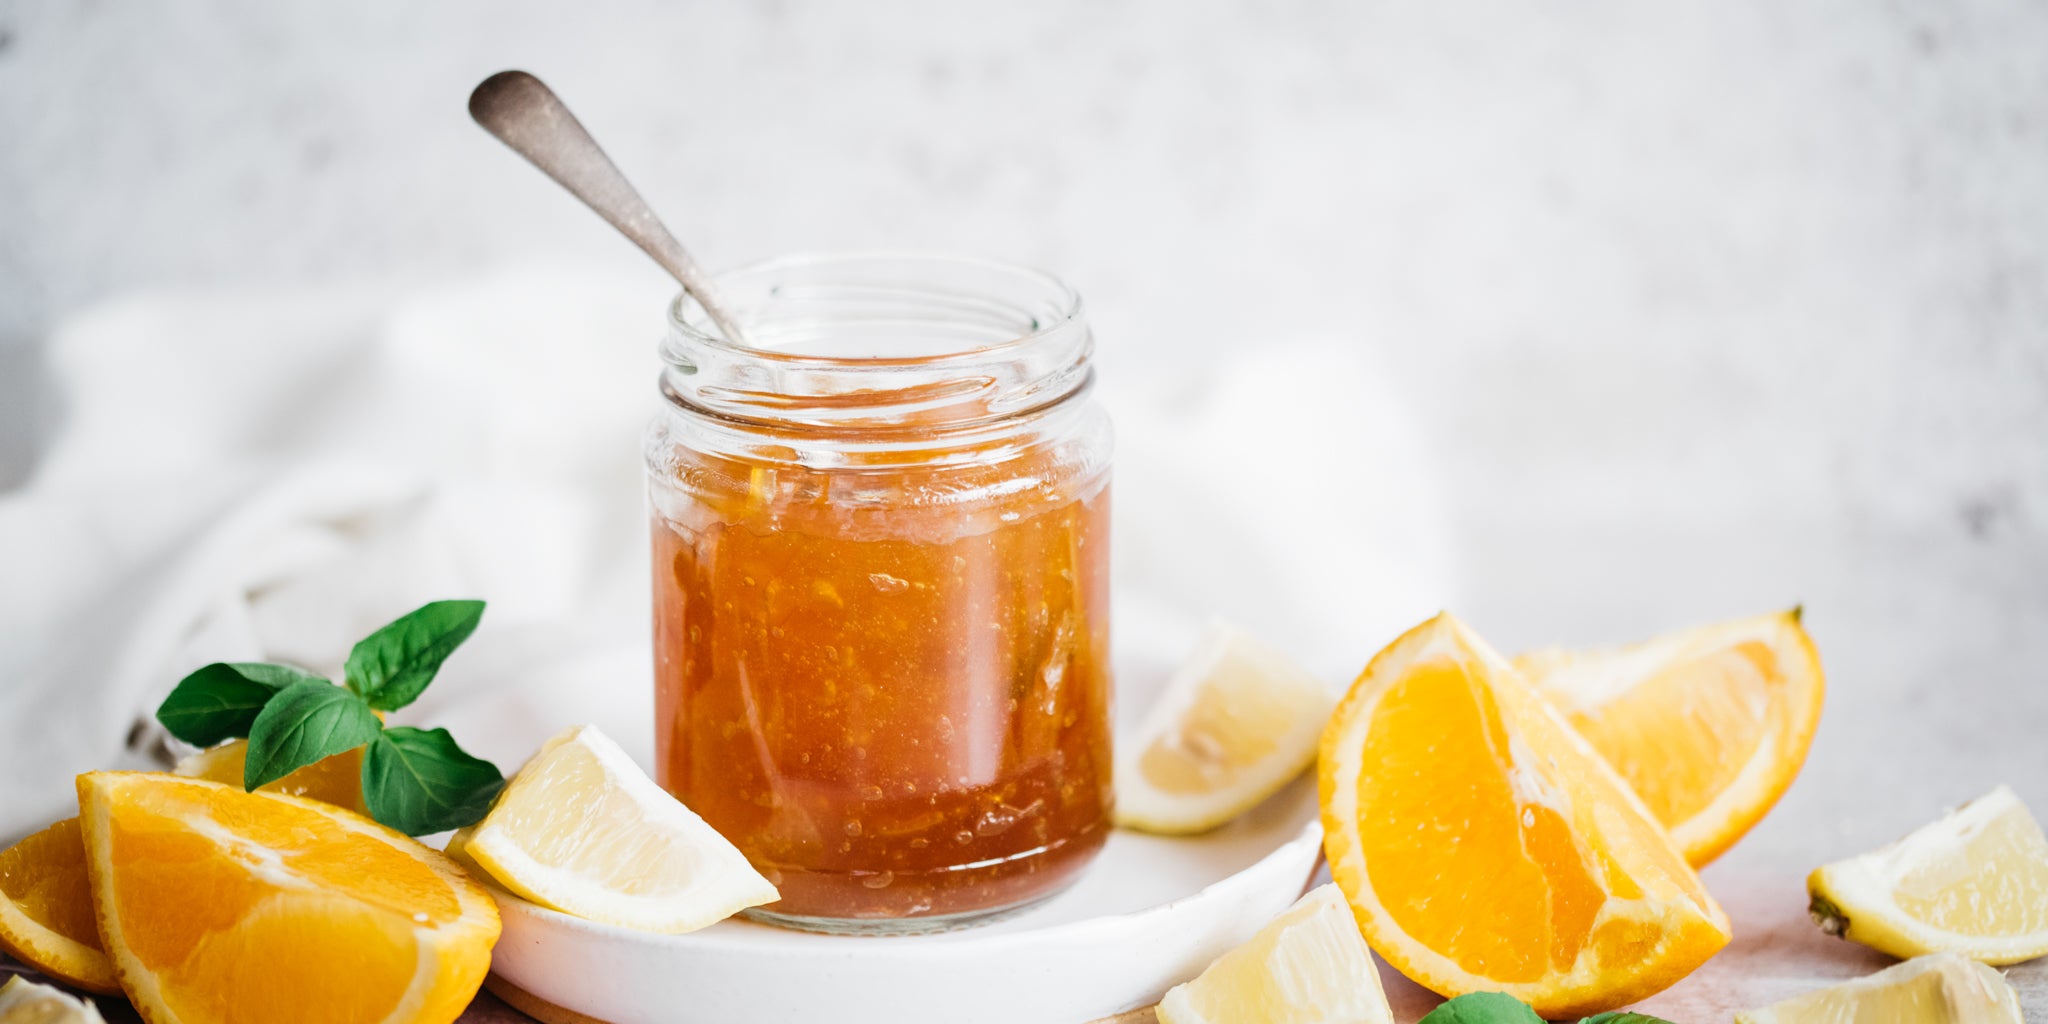 Open jar of marmalade with spoon inserted and sliced oranges beside it